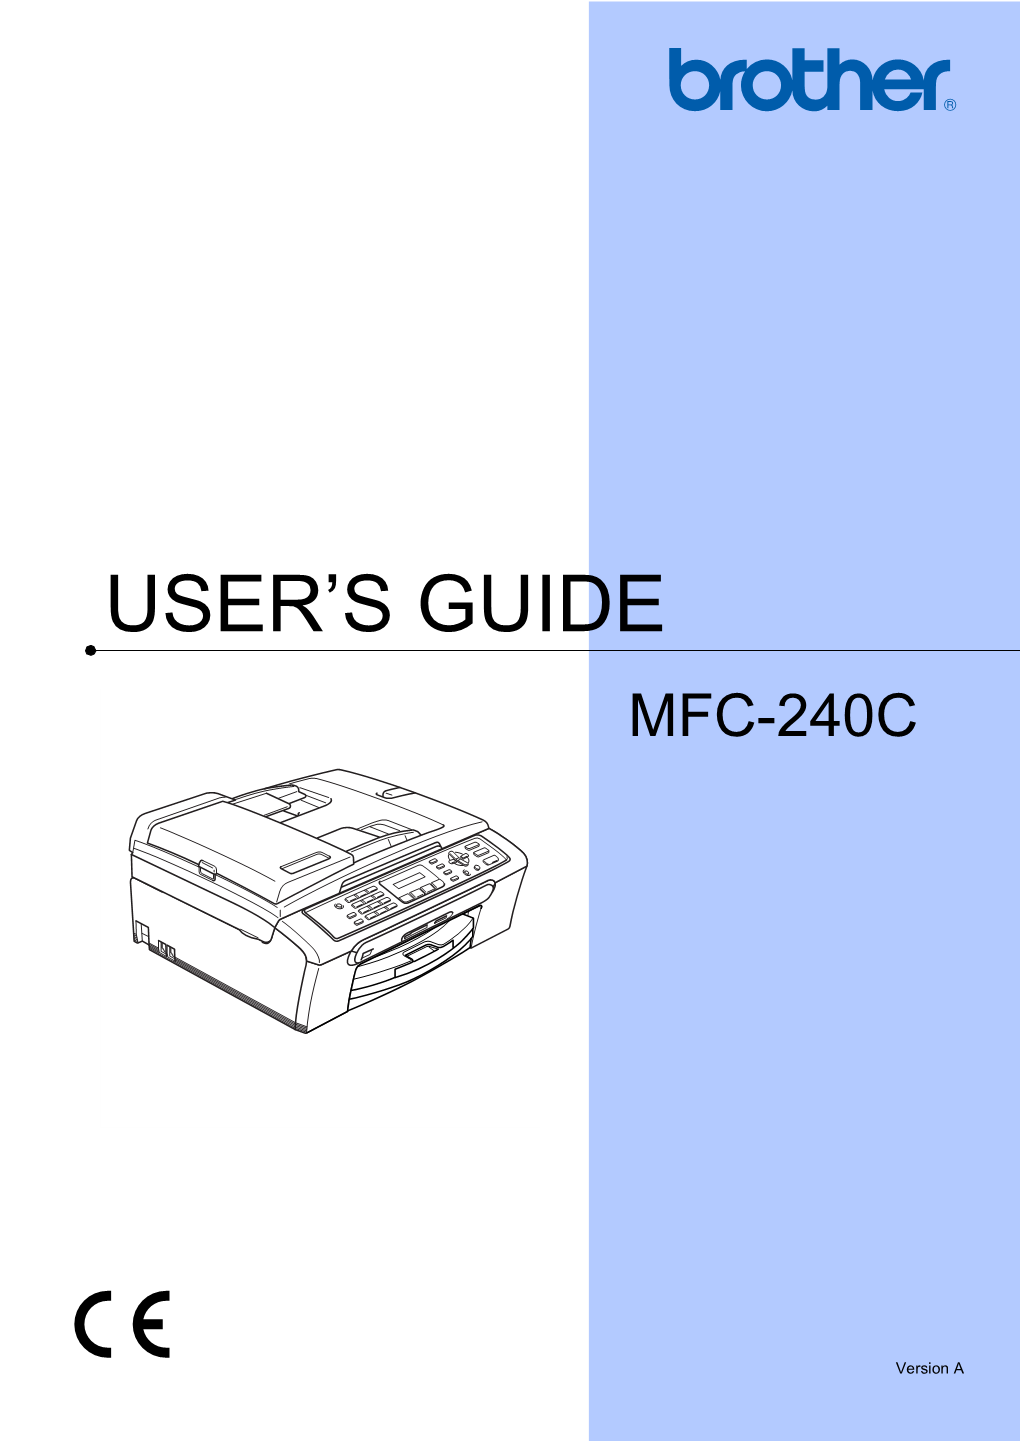 User's Guide with Your Sales Receipt As a Permanent Record of Your Purchase, in the Event of Theft, Fire Or Warranty Service